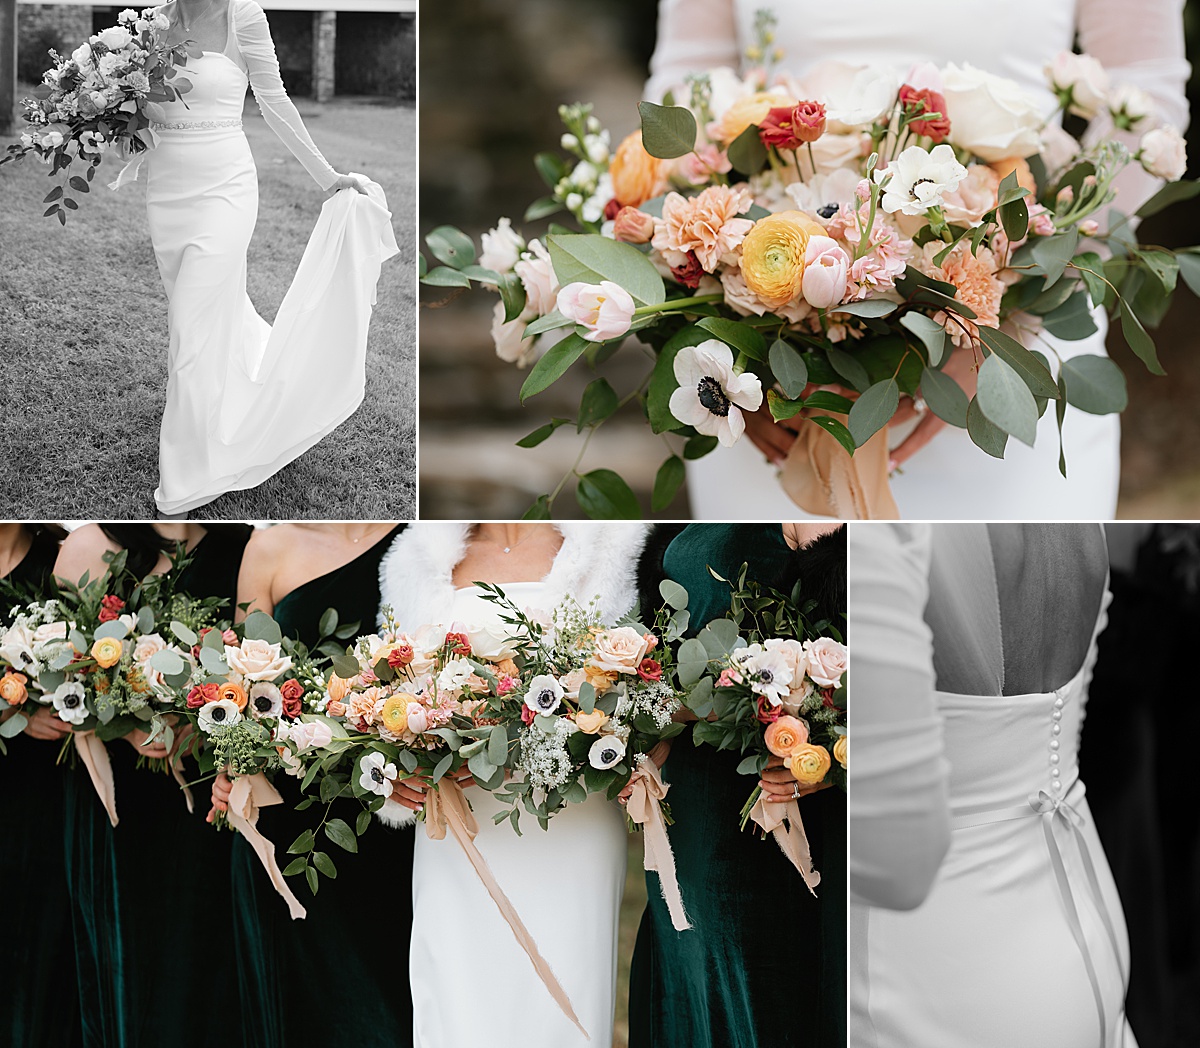 Bride and bridesmaid wedding bouquets featuring a white, orange, and pink color palette with greenery.